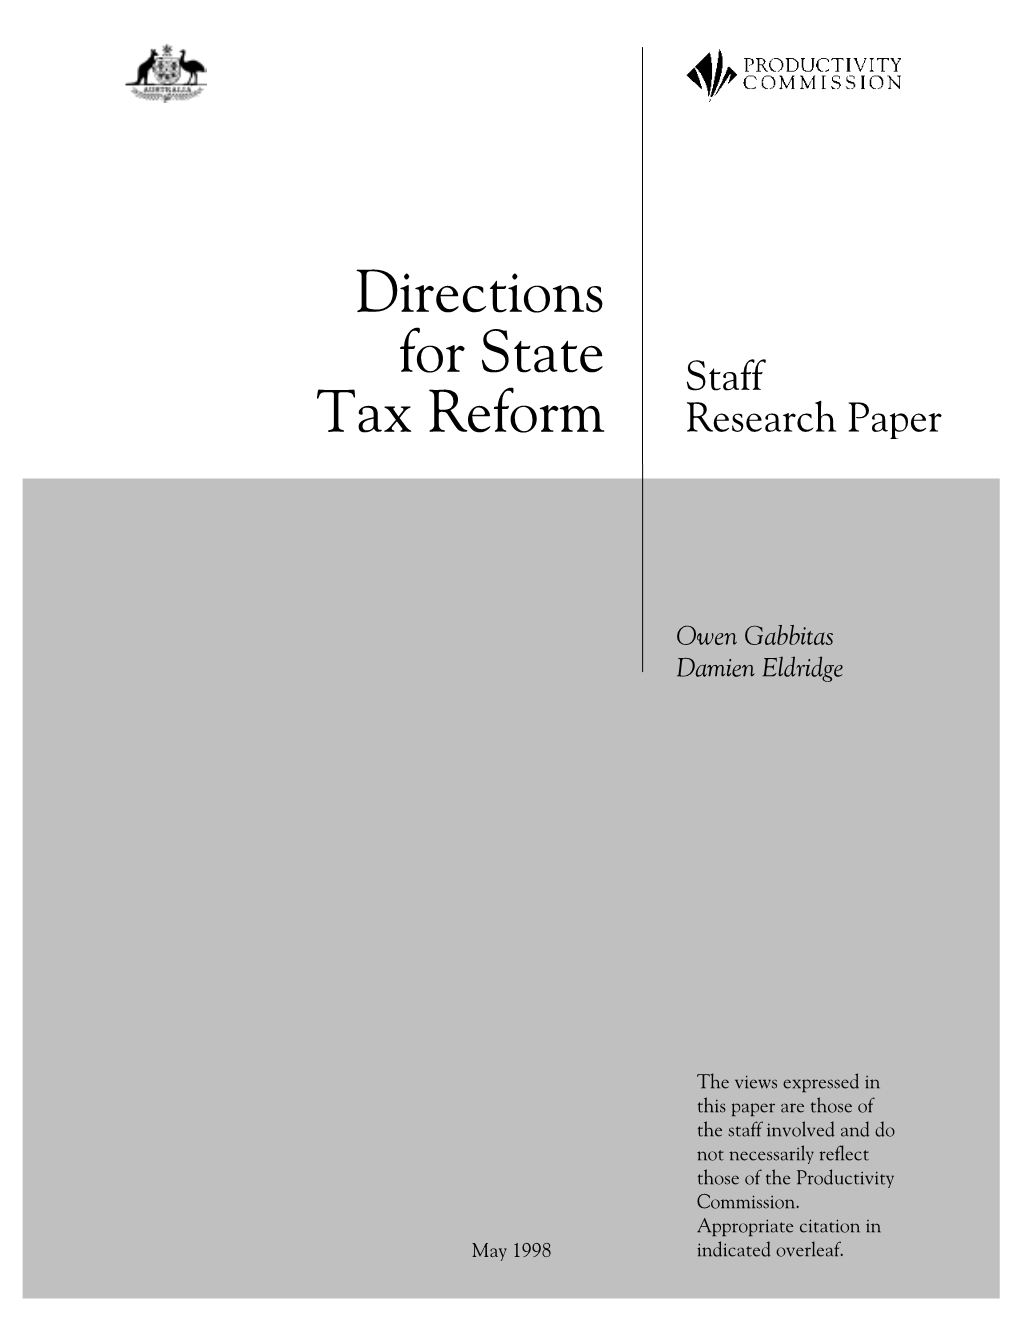 Directions for State Tax Reform, Productivity Commission Staff Research Paper, Ausinfo, Canberra, May